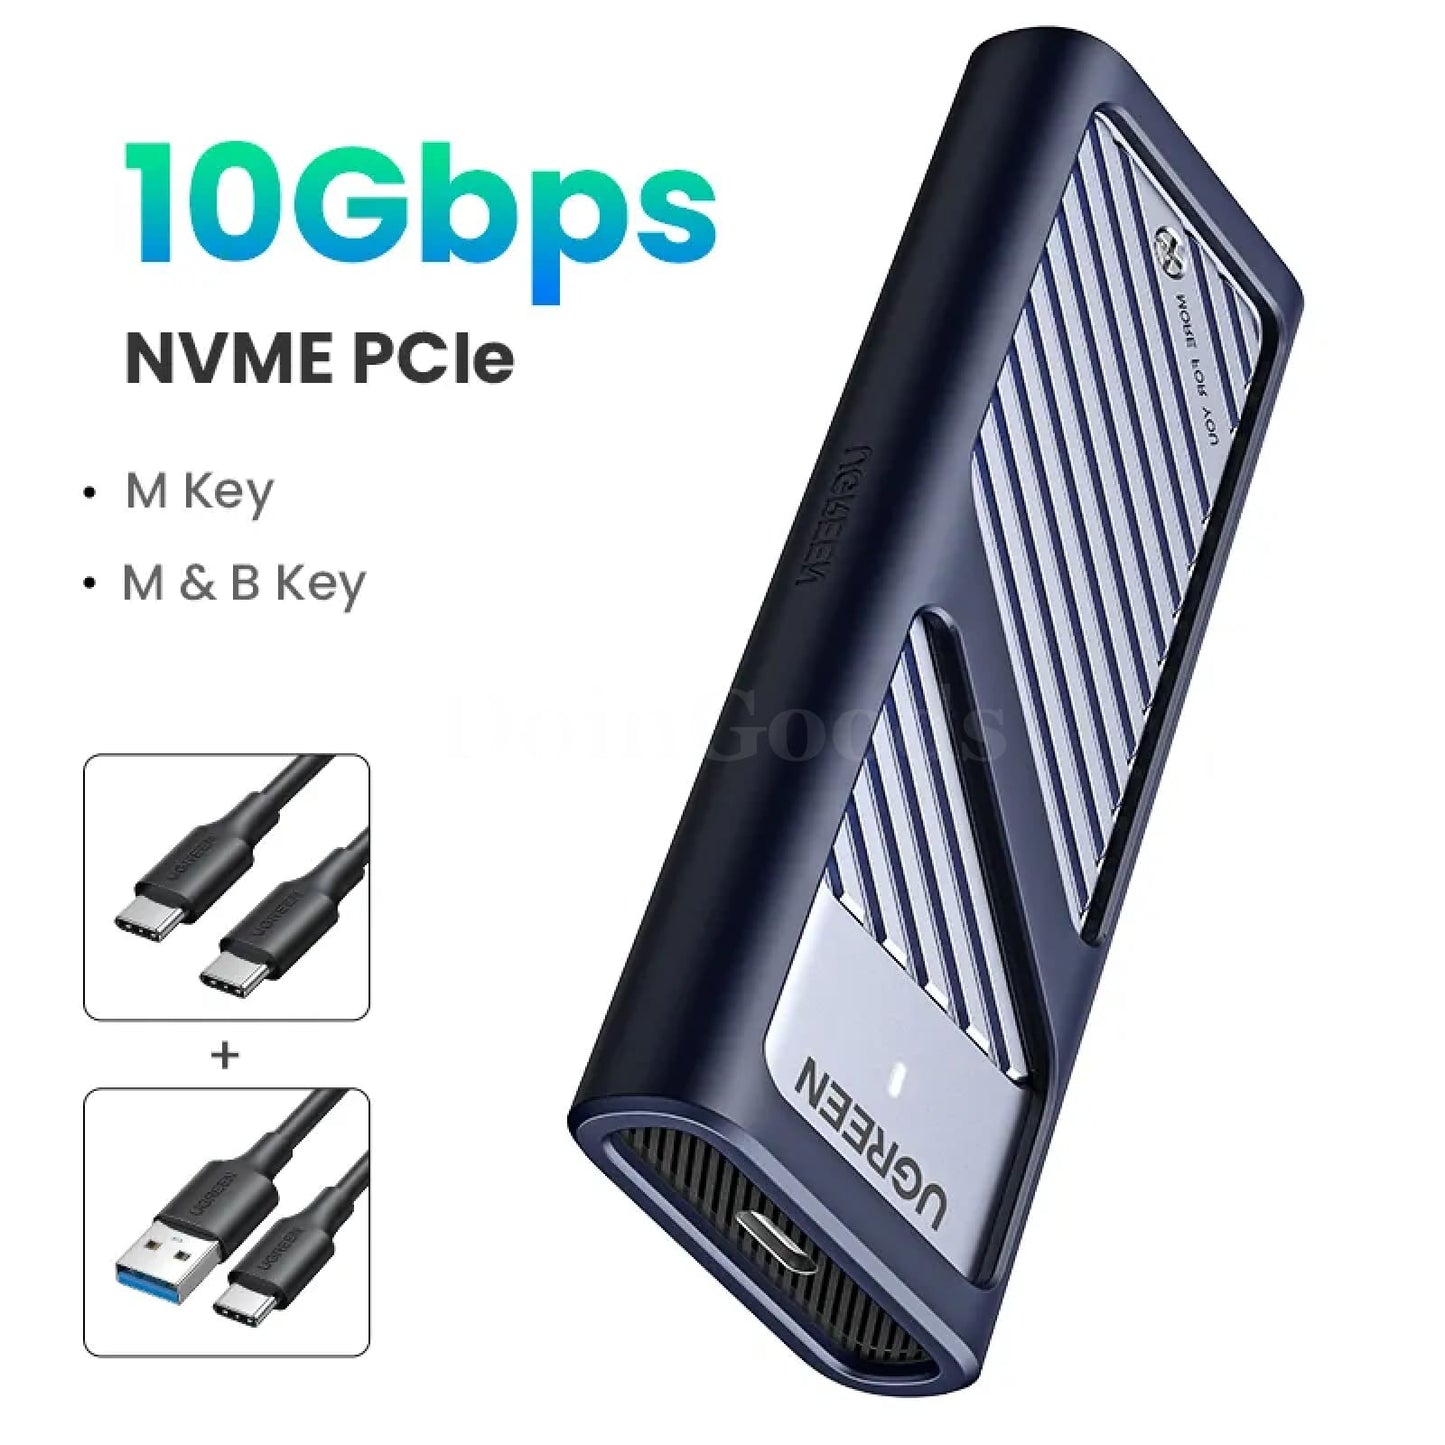 Ugreen M2 Ssd Case Nvme Sata Dual Protocol To Usb-C 3.1 Adapter Disk Box 10Gbps Nvme Pcie 301635